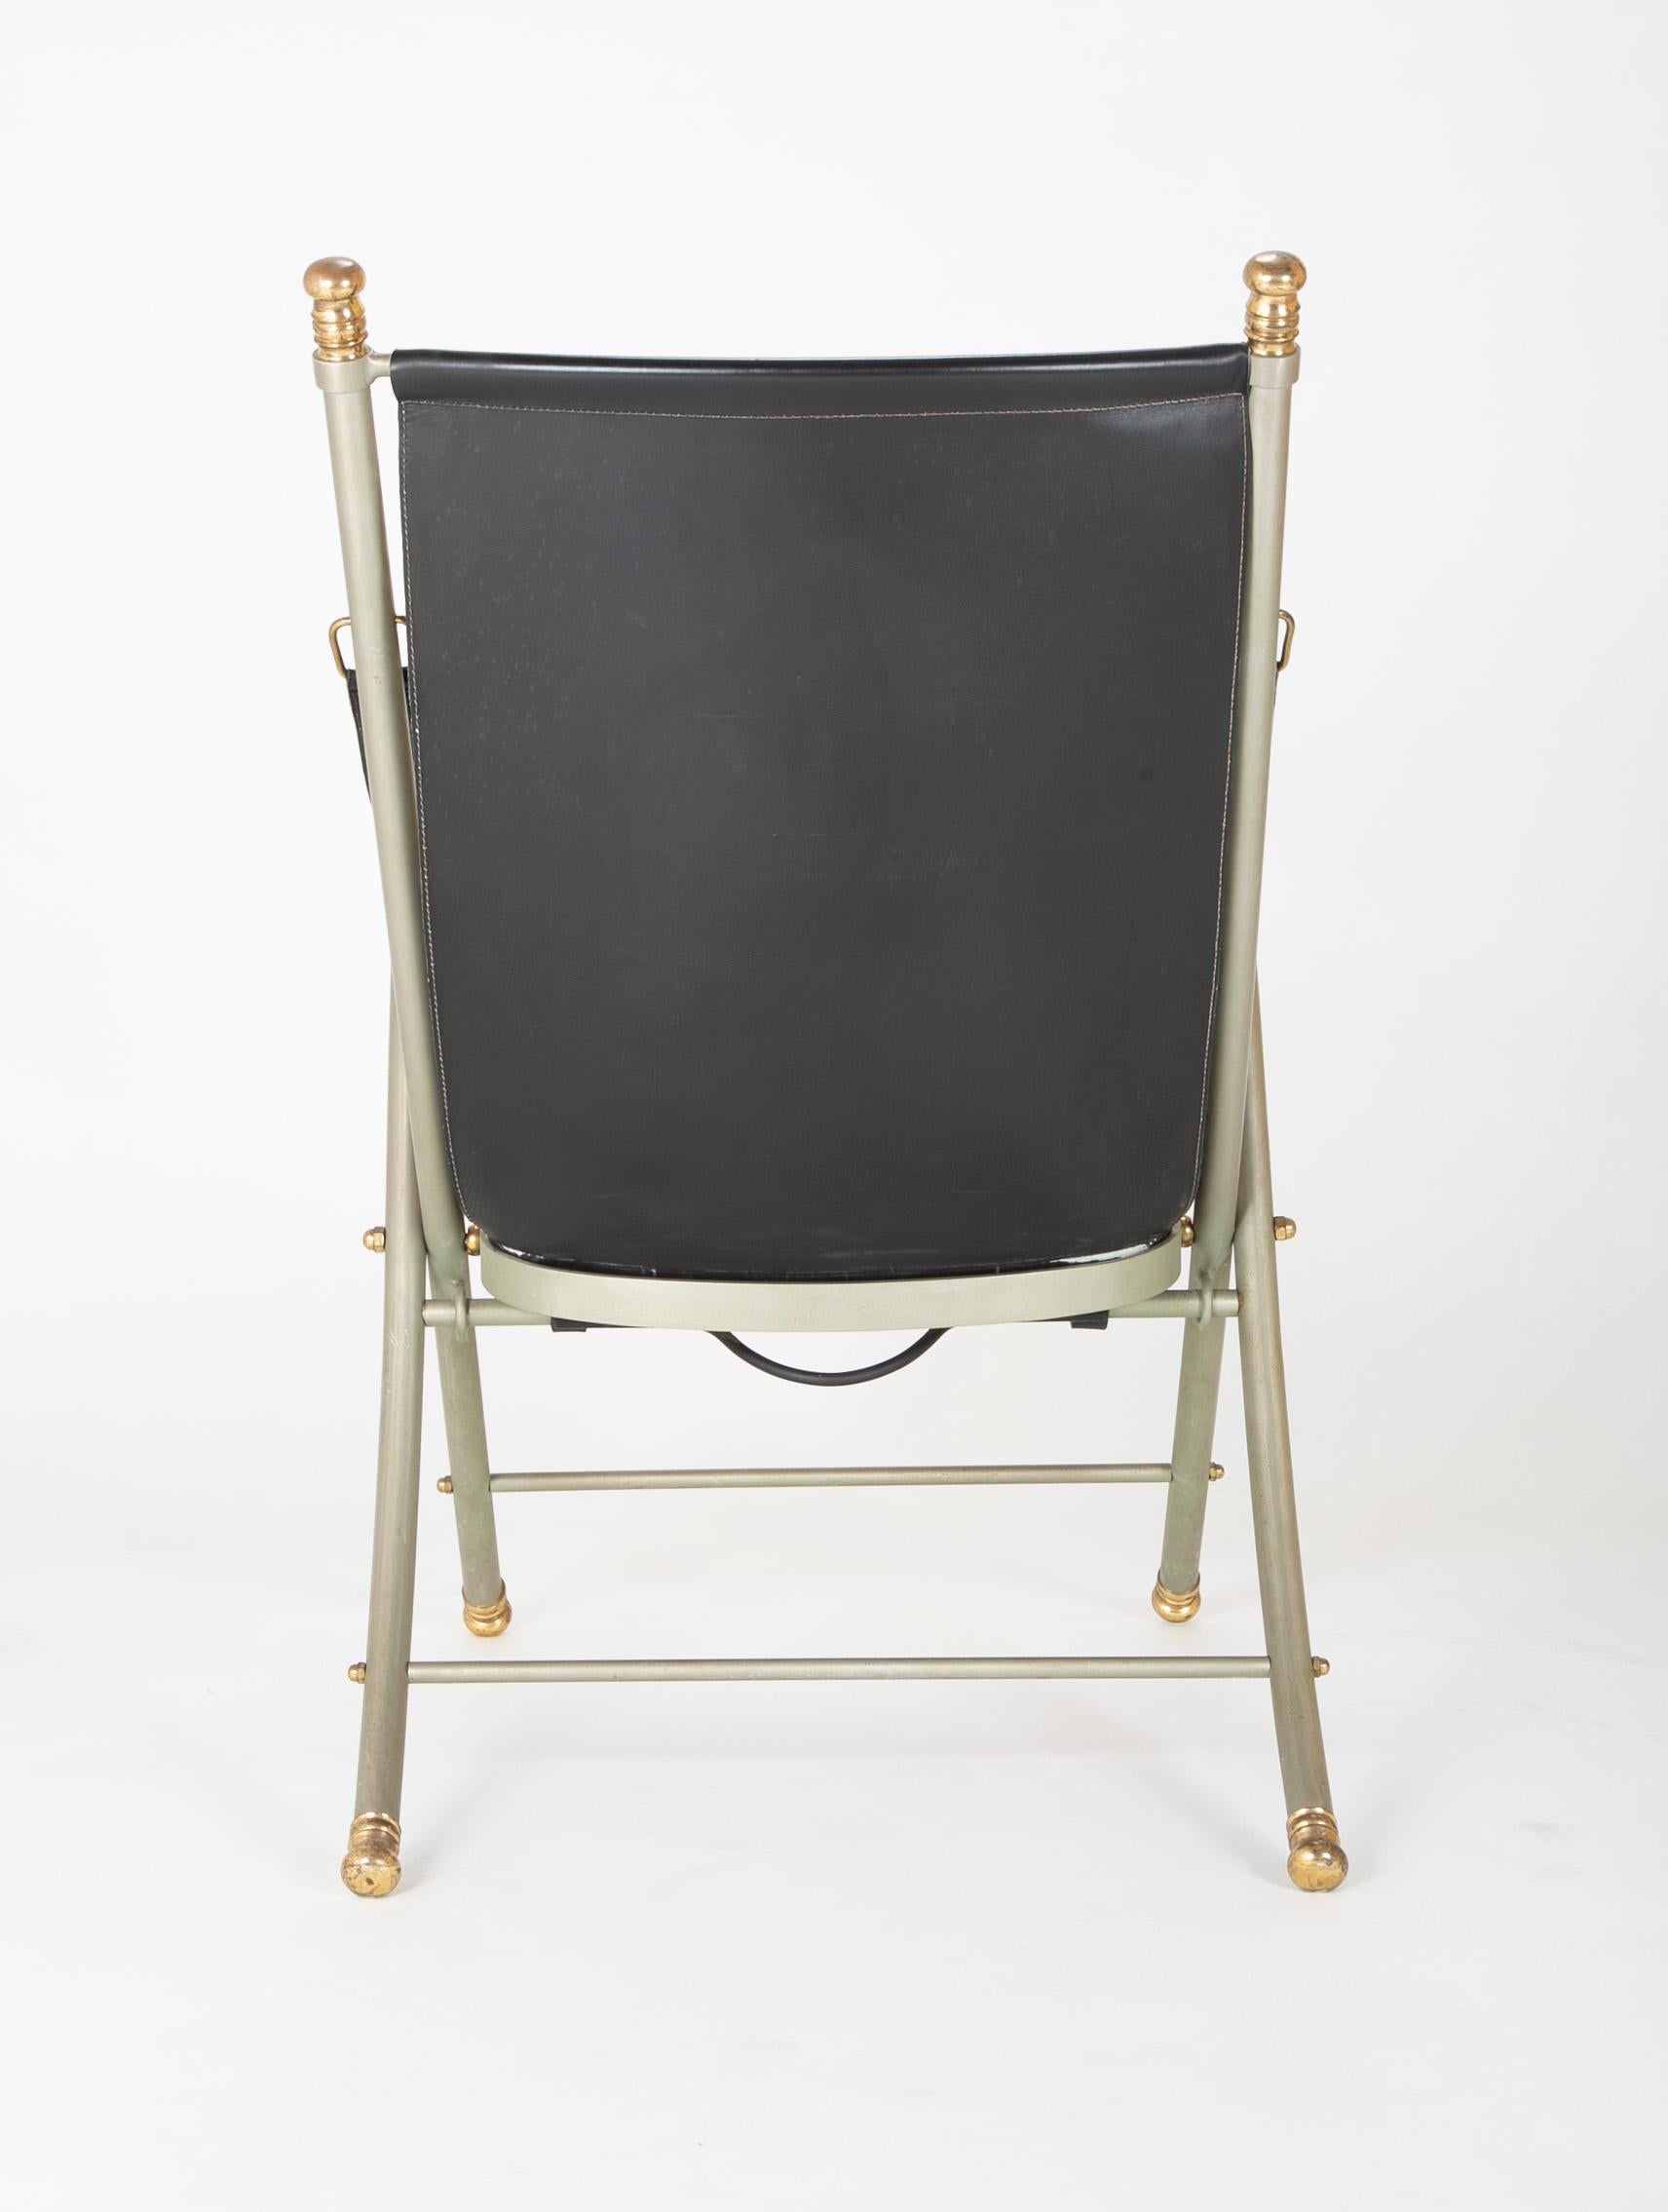 Maison Jansen Brushed Steel and Brass Campaign Armchair In Good Condition For Sale In Stamford, CT